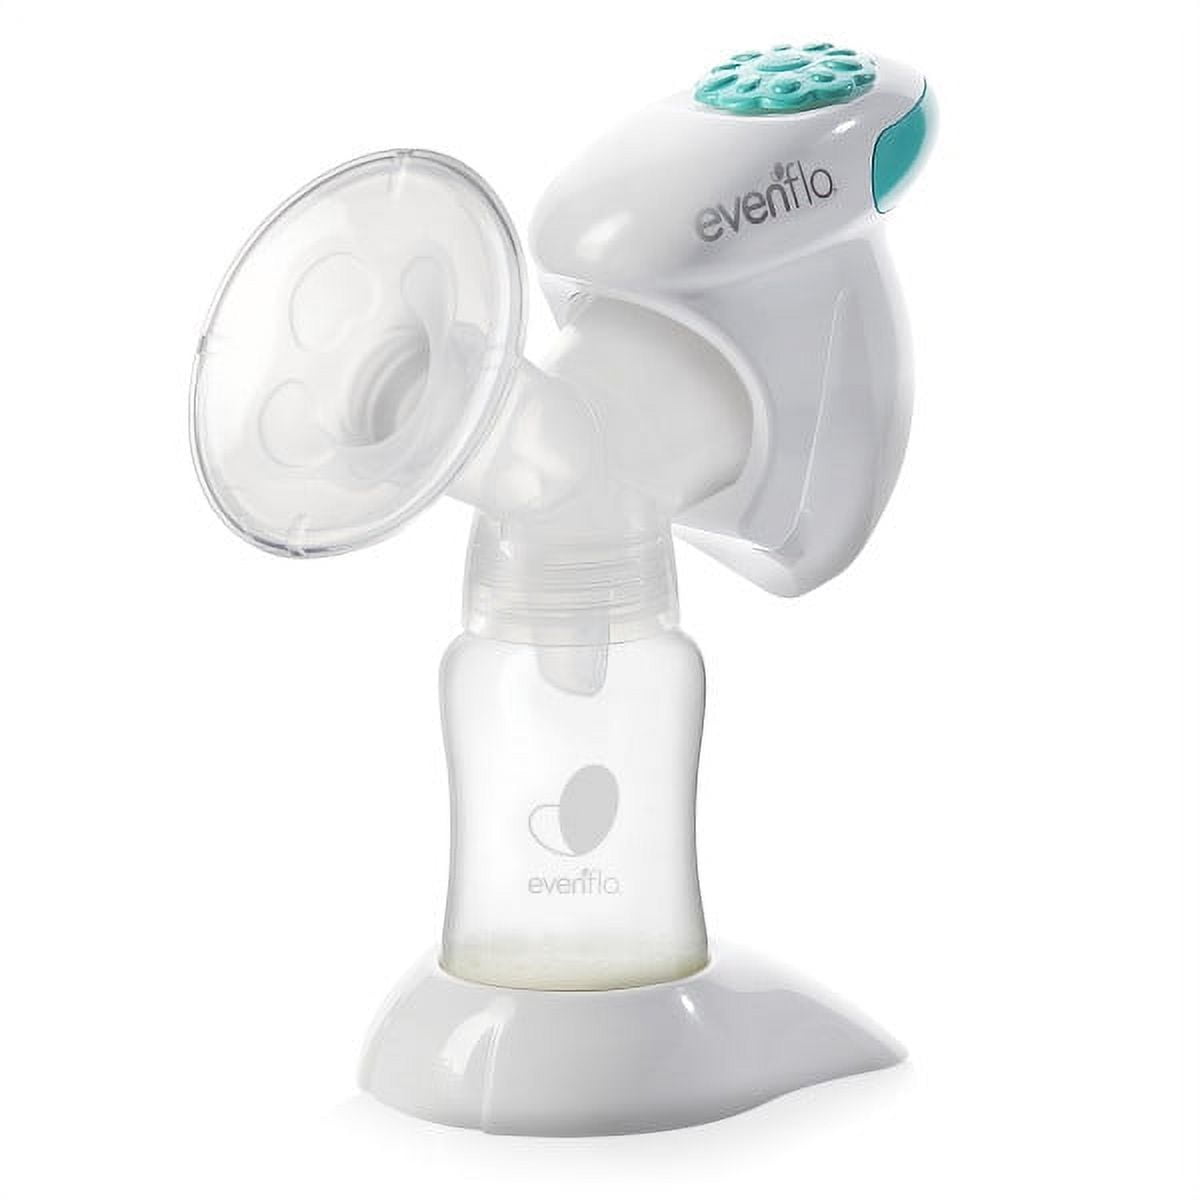 Evenflo Advanced Single Electric Breast Pump, includes Flanges, Bottles,  Membranes and Valves, White 